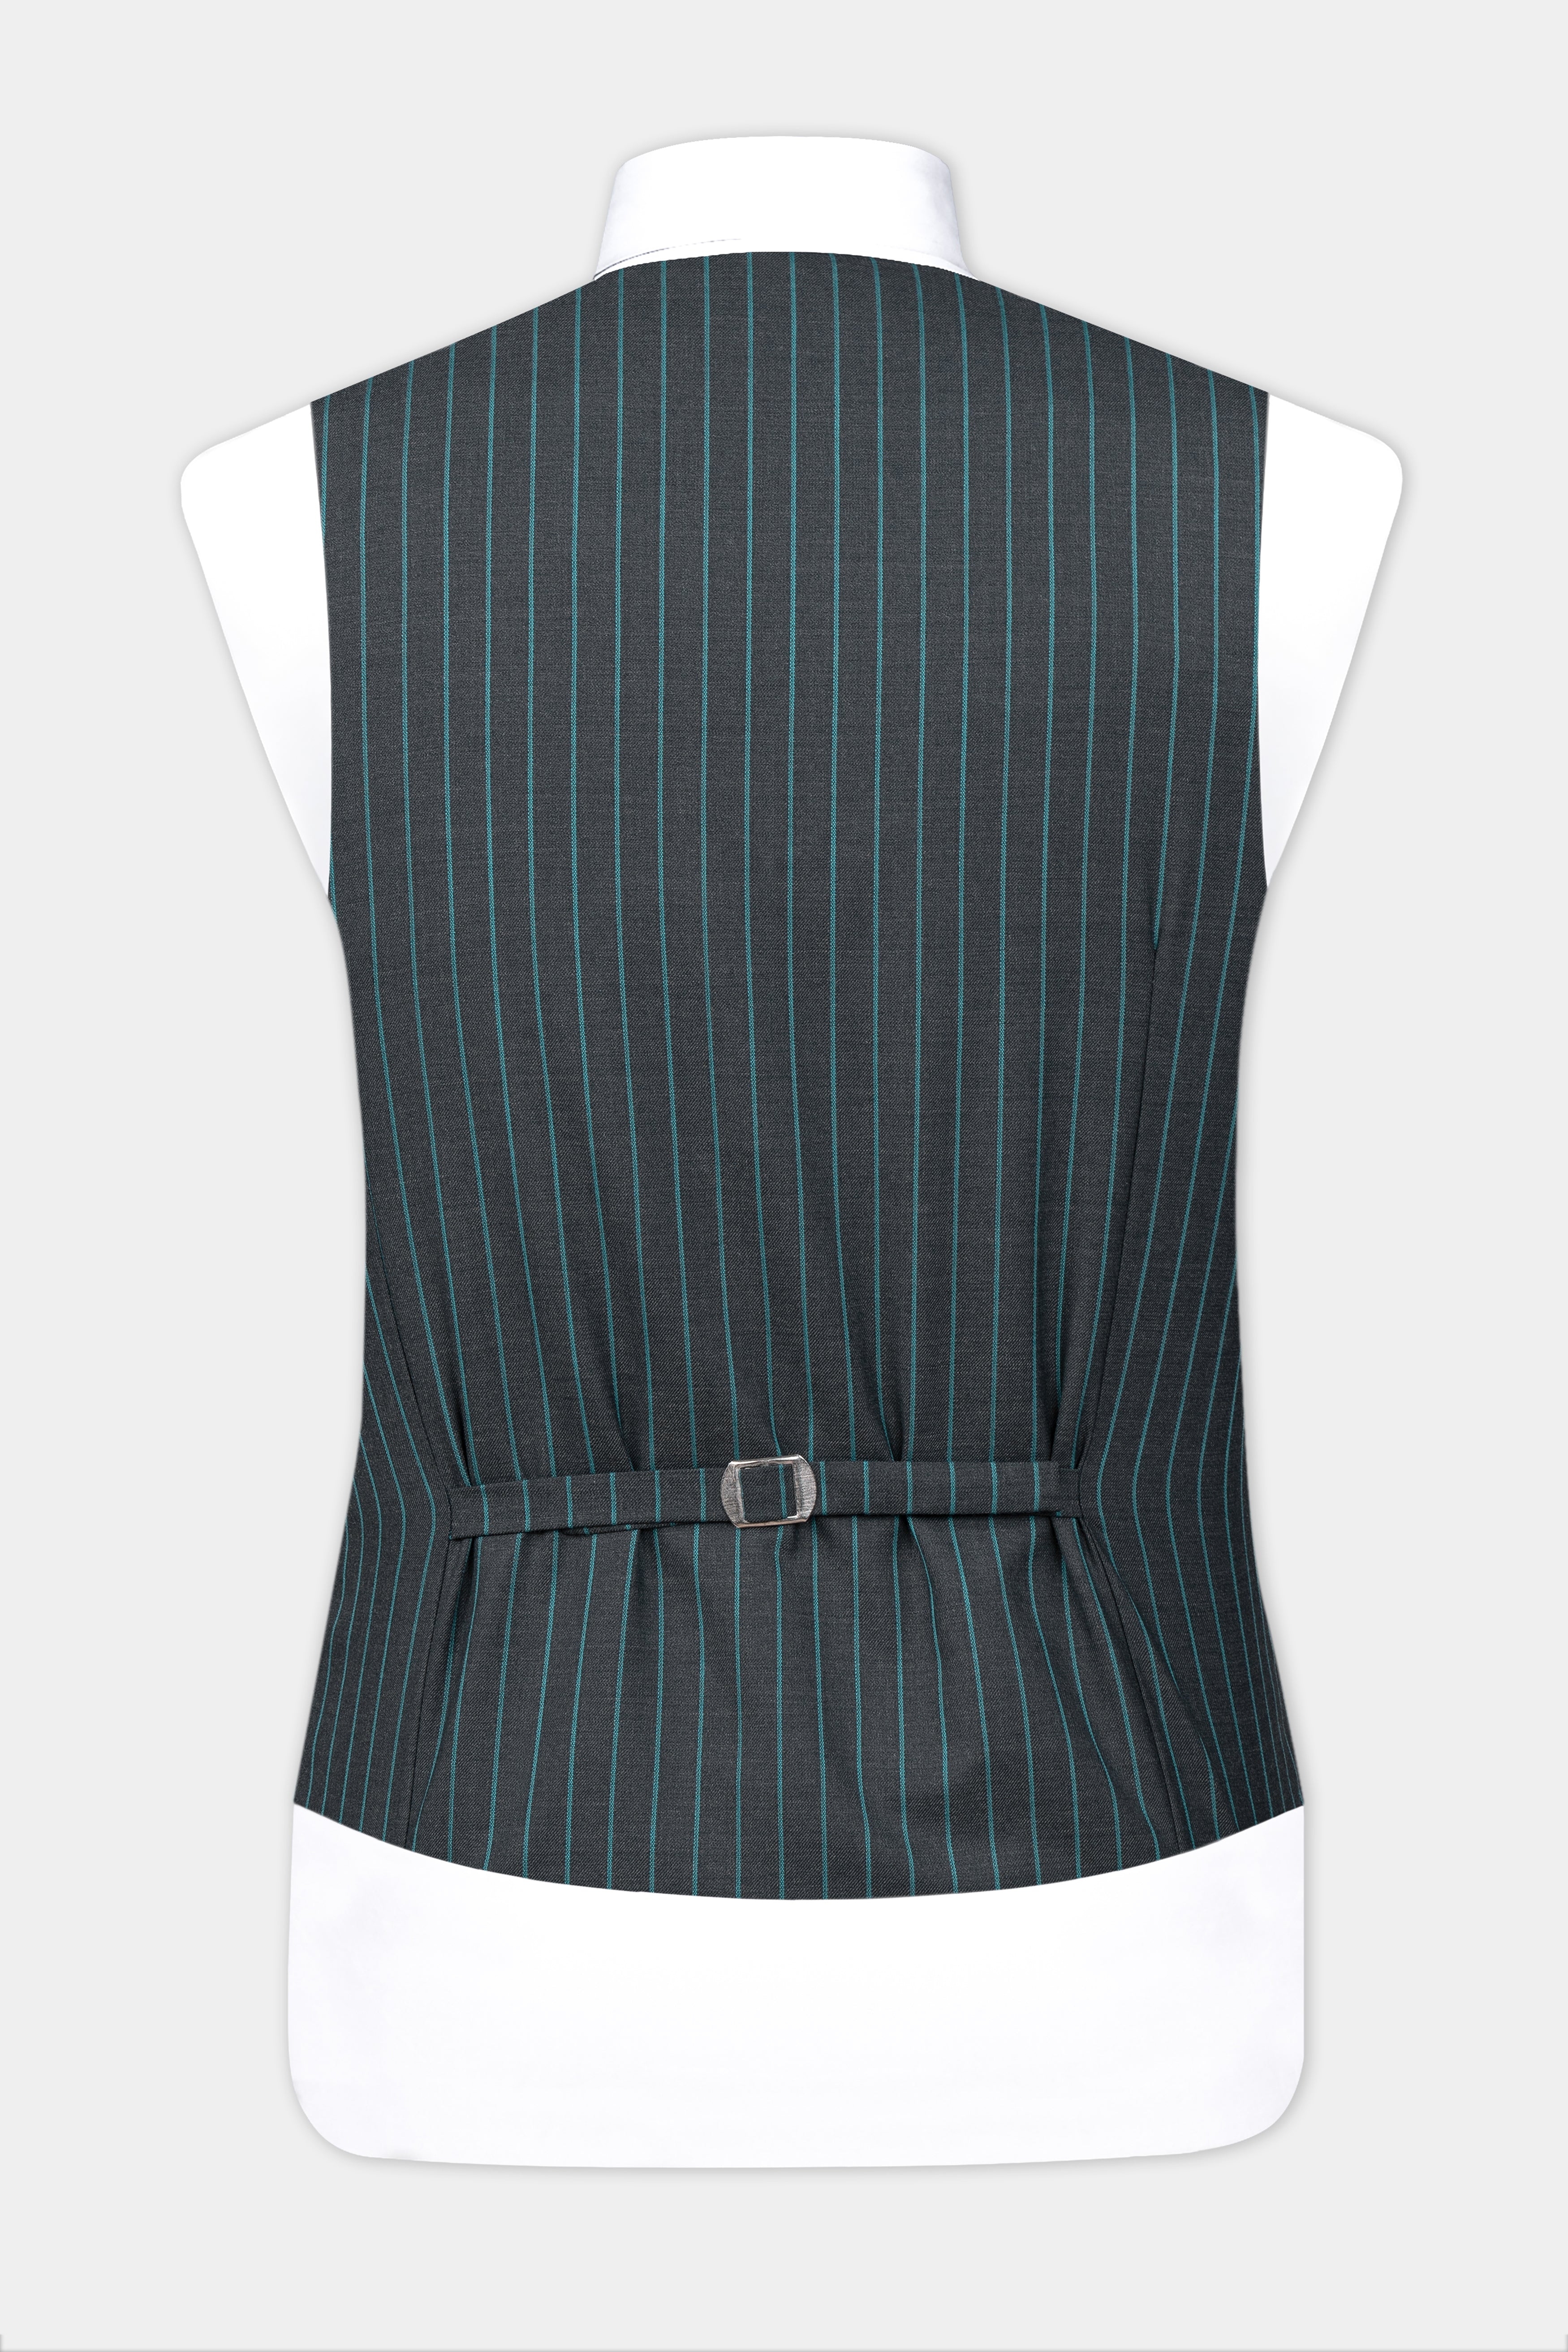 Gravel Gray and Lagoon Blue Striped Wool Rich Waistcoat